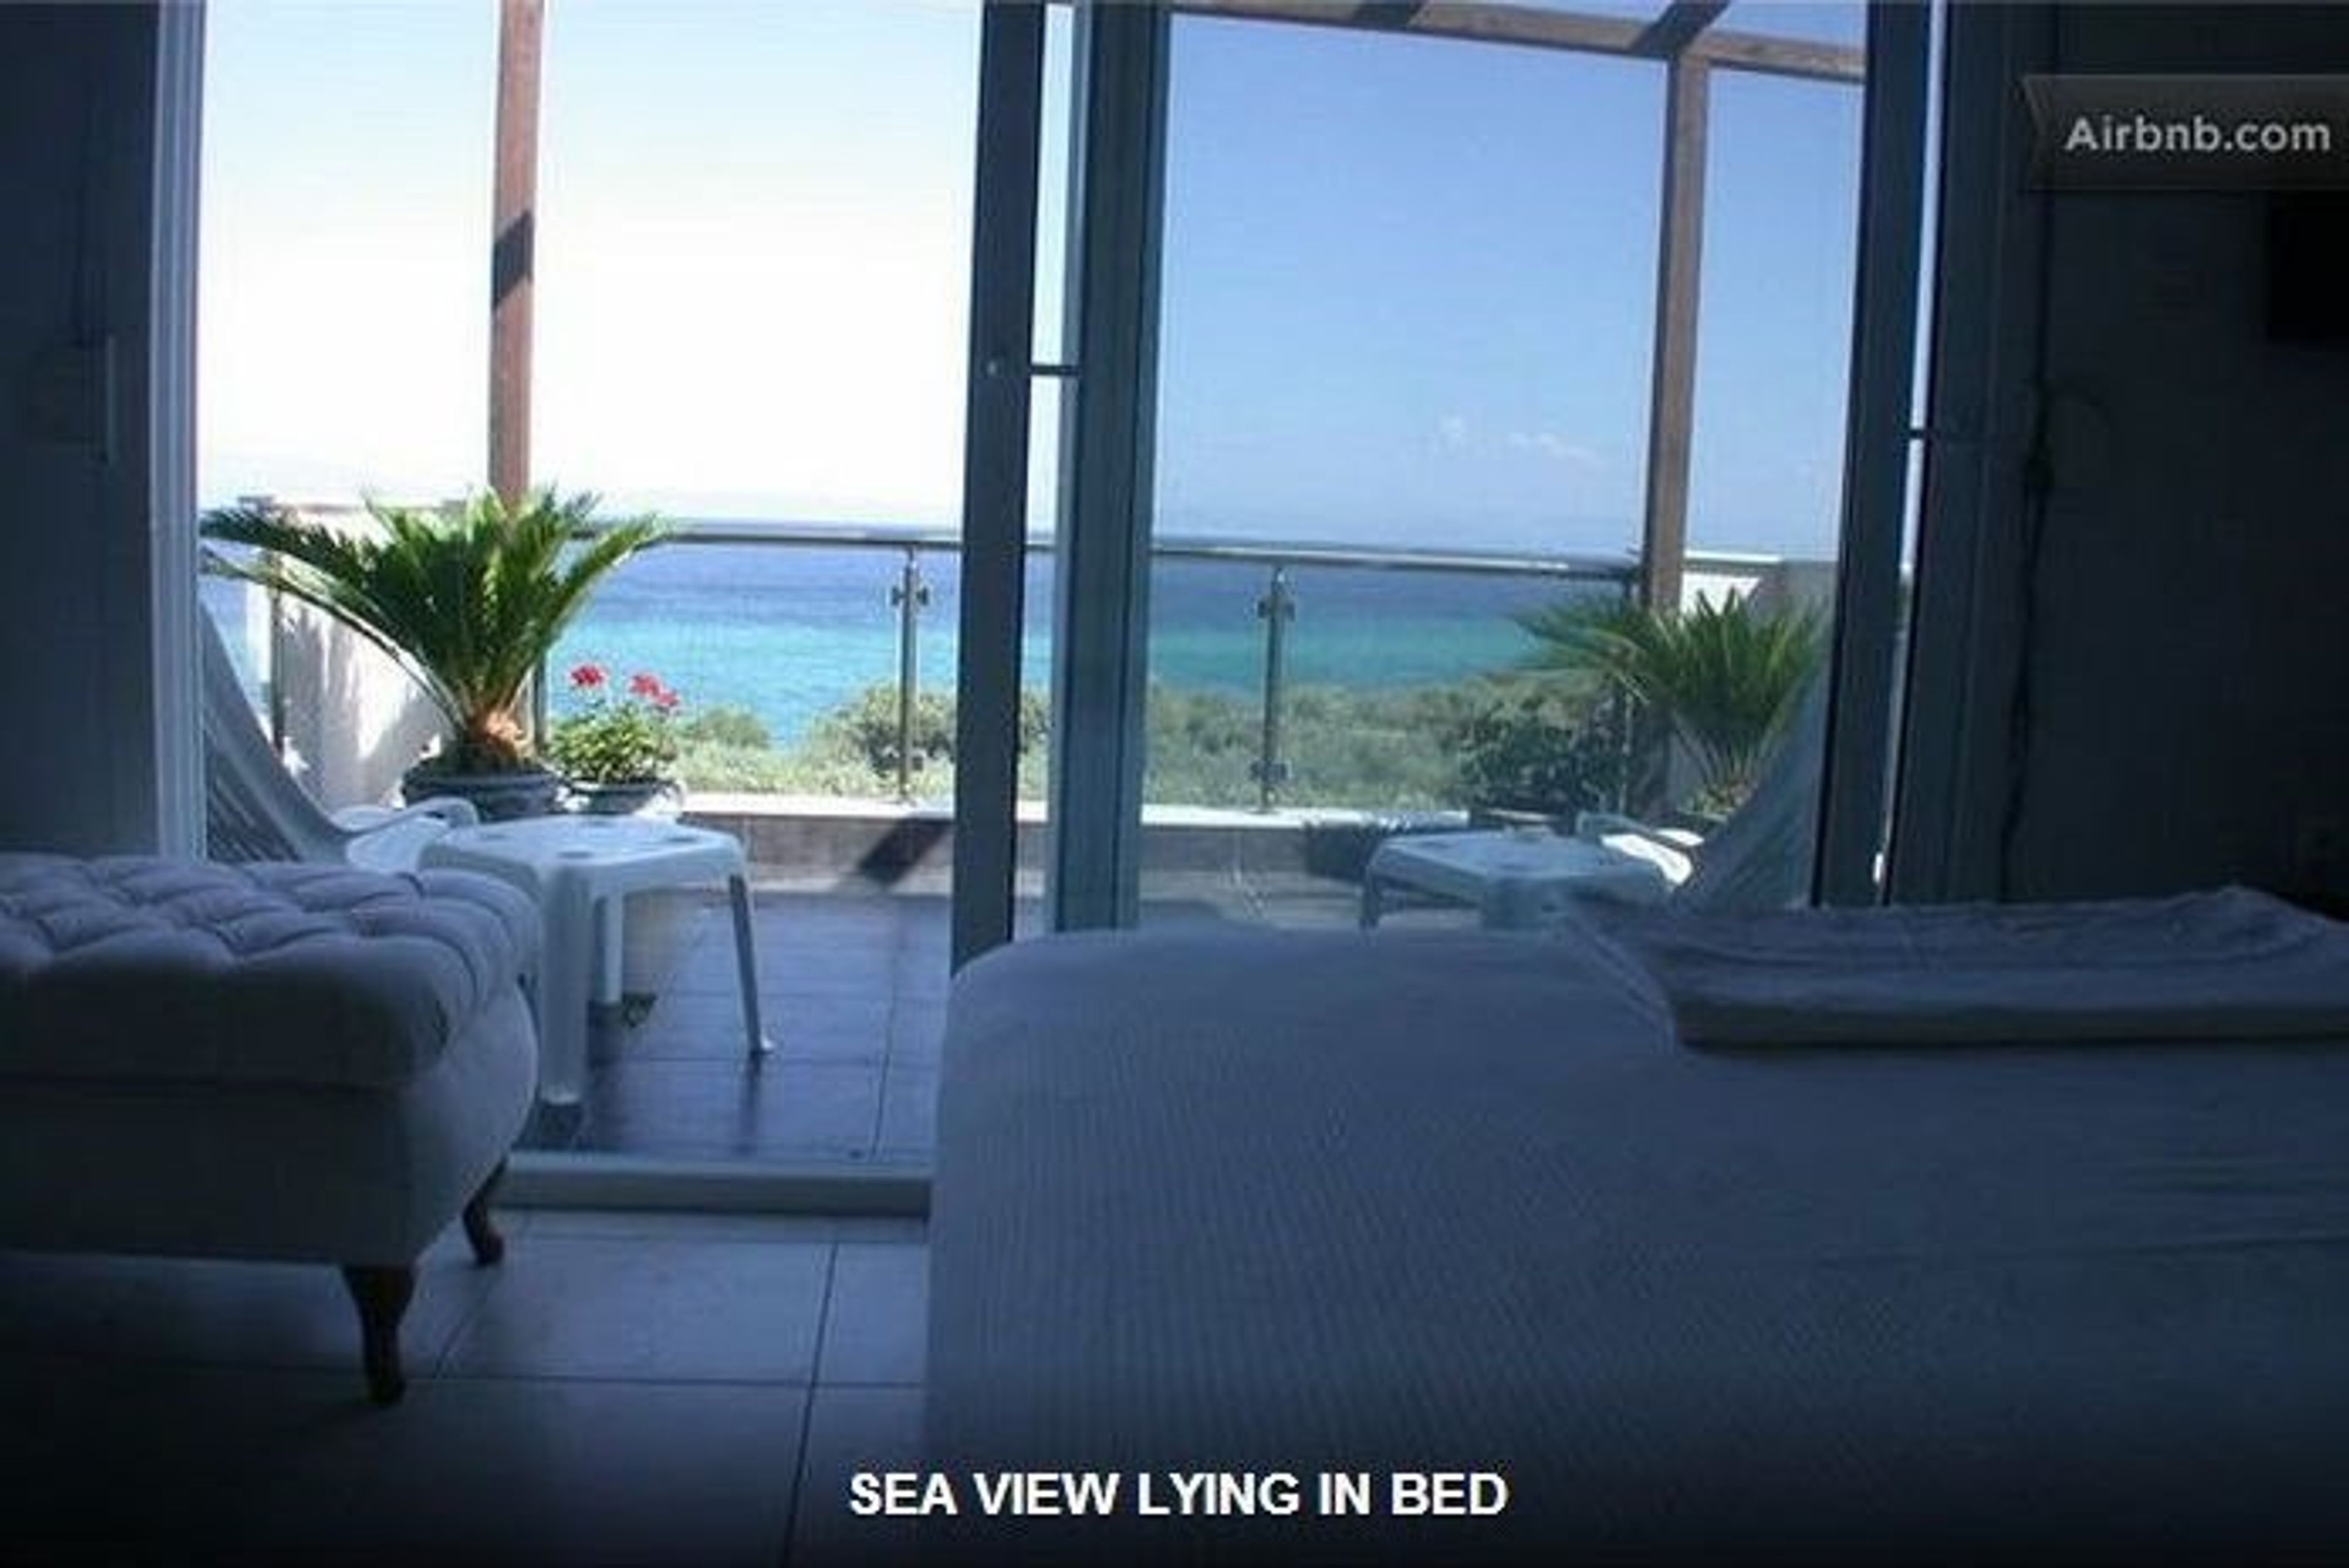 Ocean view by person lying in bed in master bedroom.